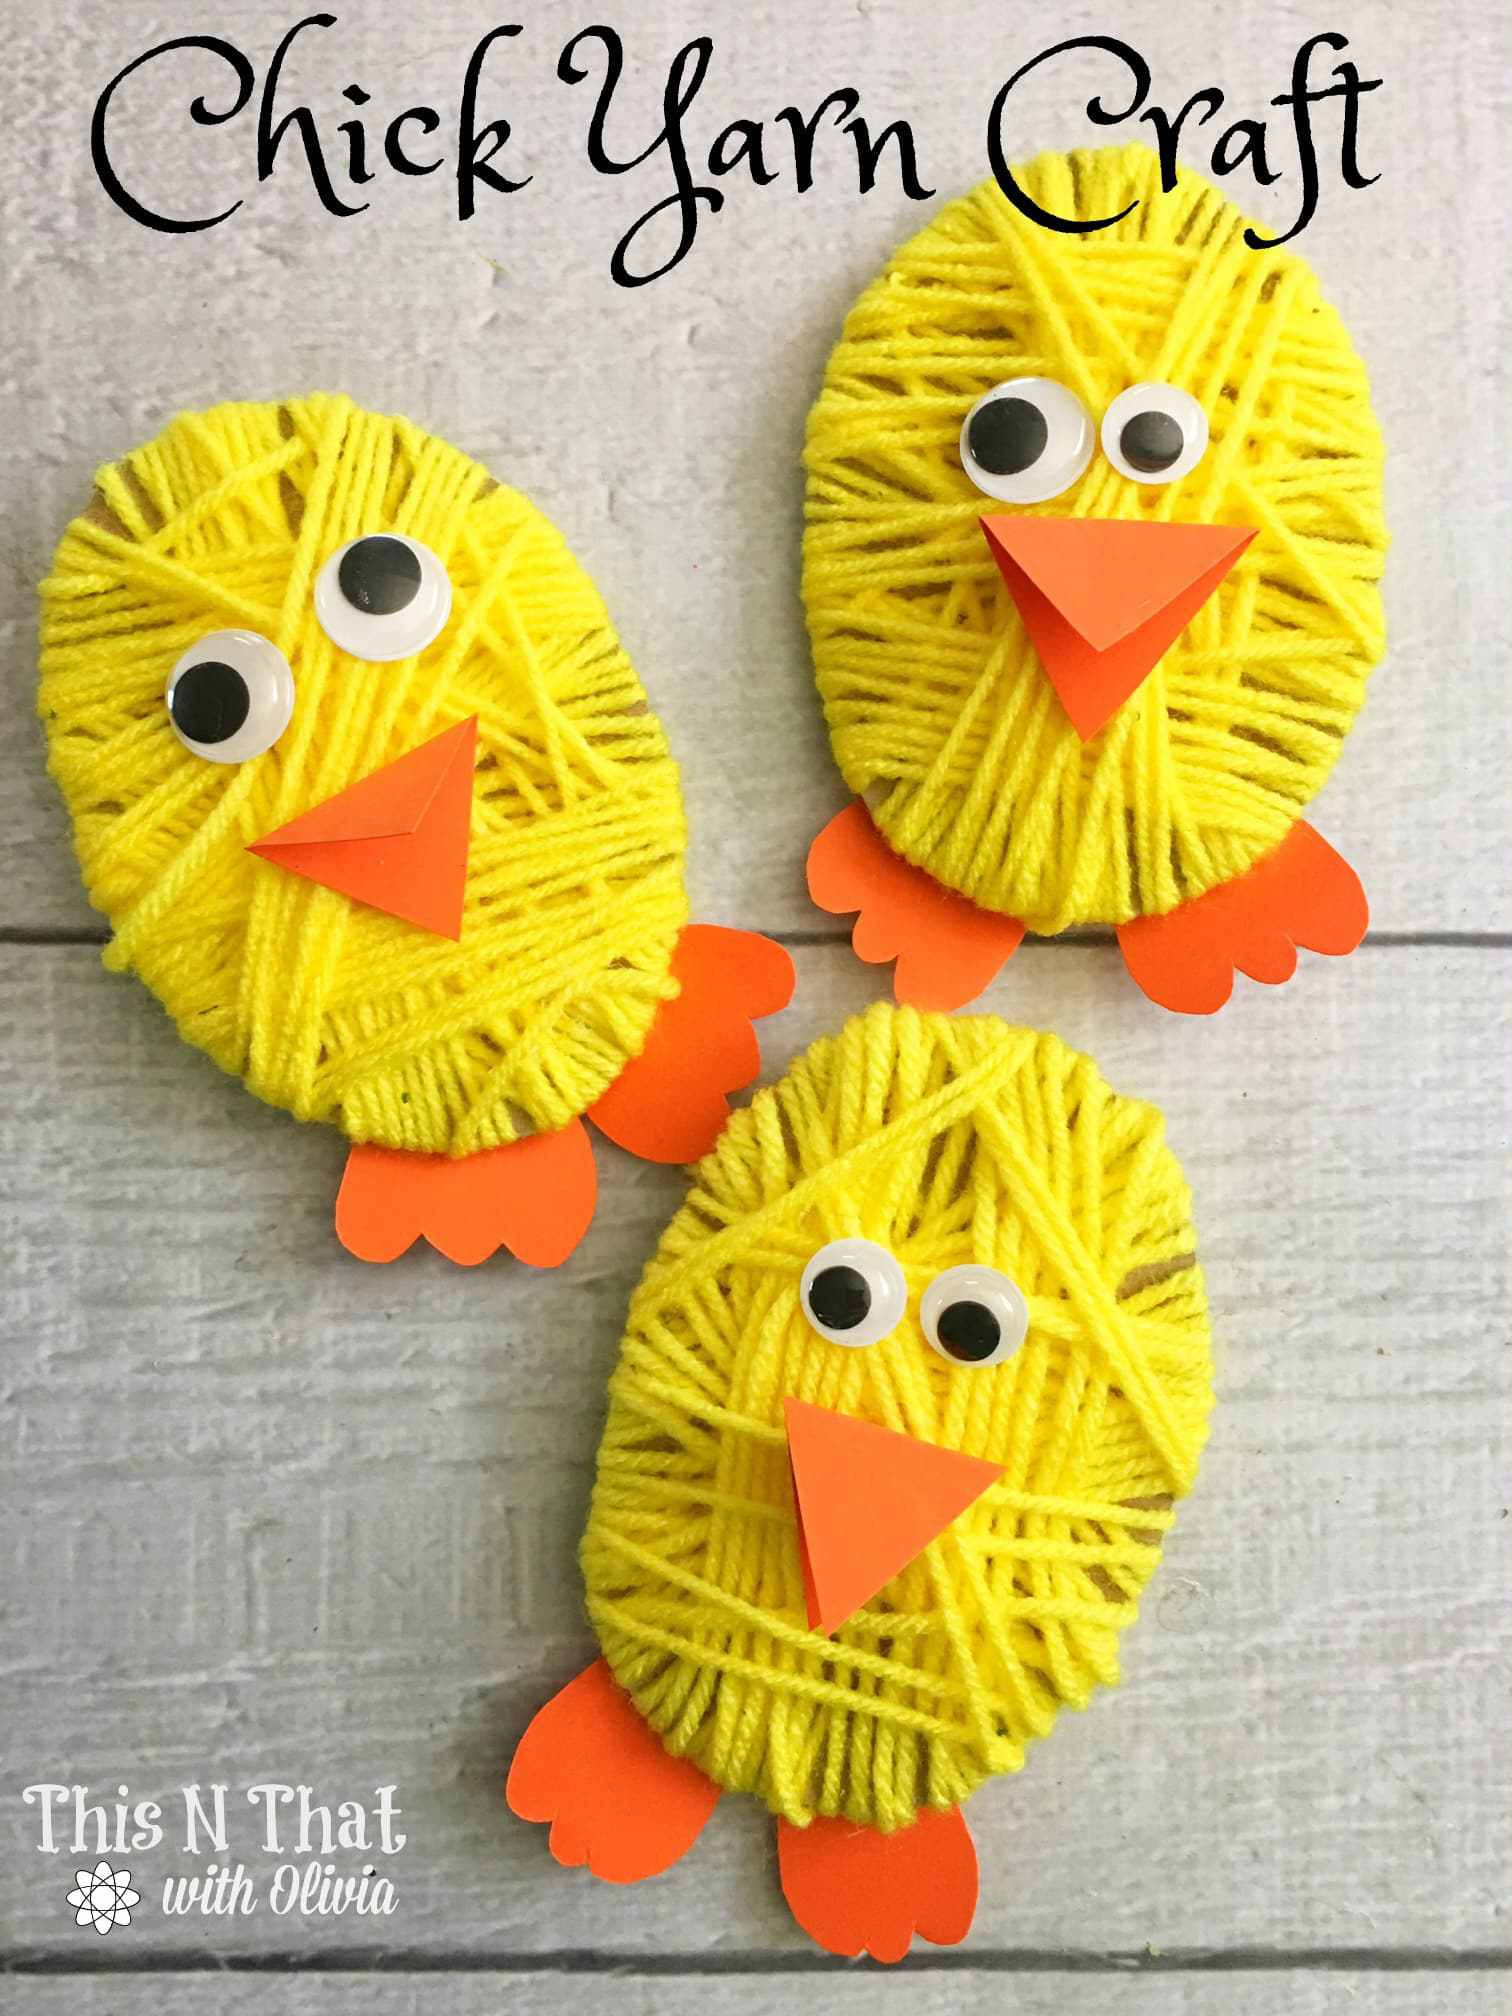 Easter Craft Ideas For Toddlers
 Over 33 Easter Craft Ideas for Kids to Make Simple Cute